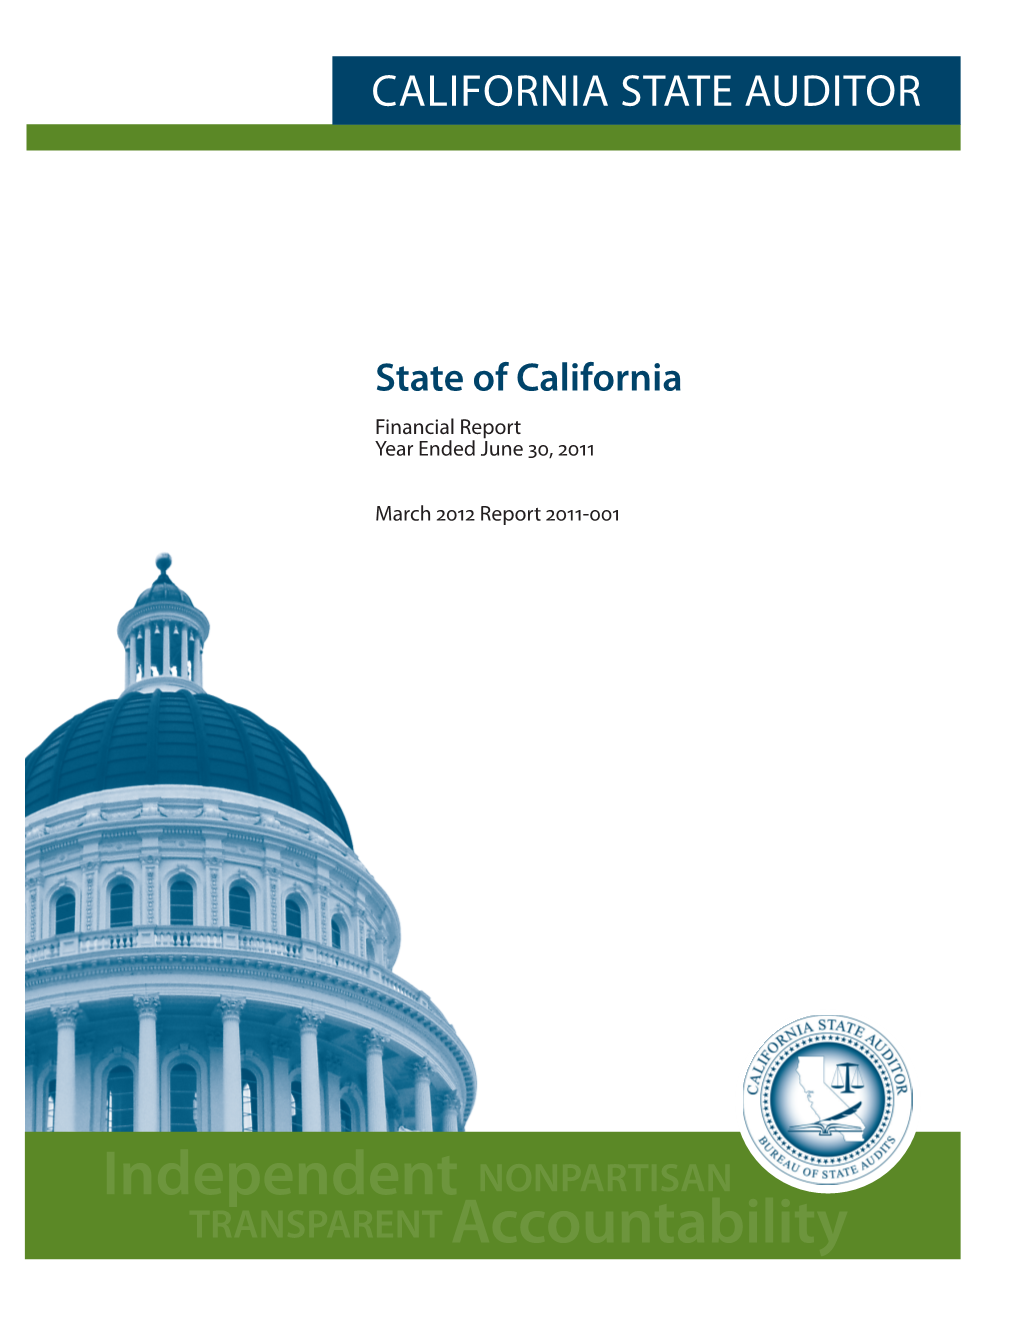 State of California: Financial Report Year Ended June 30, 2011